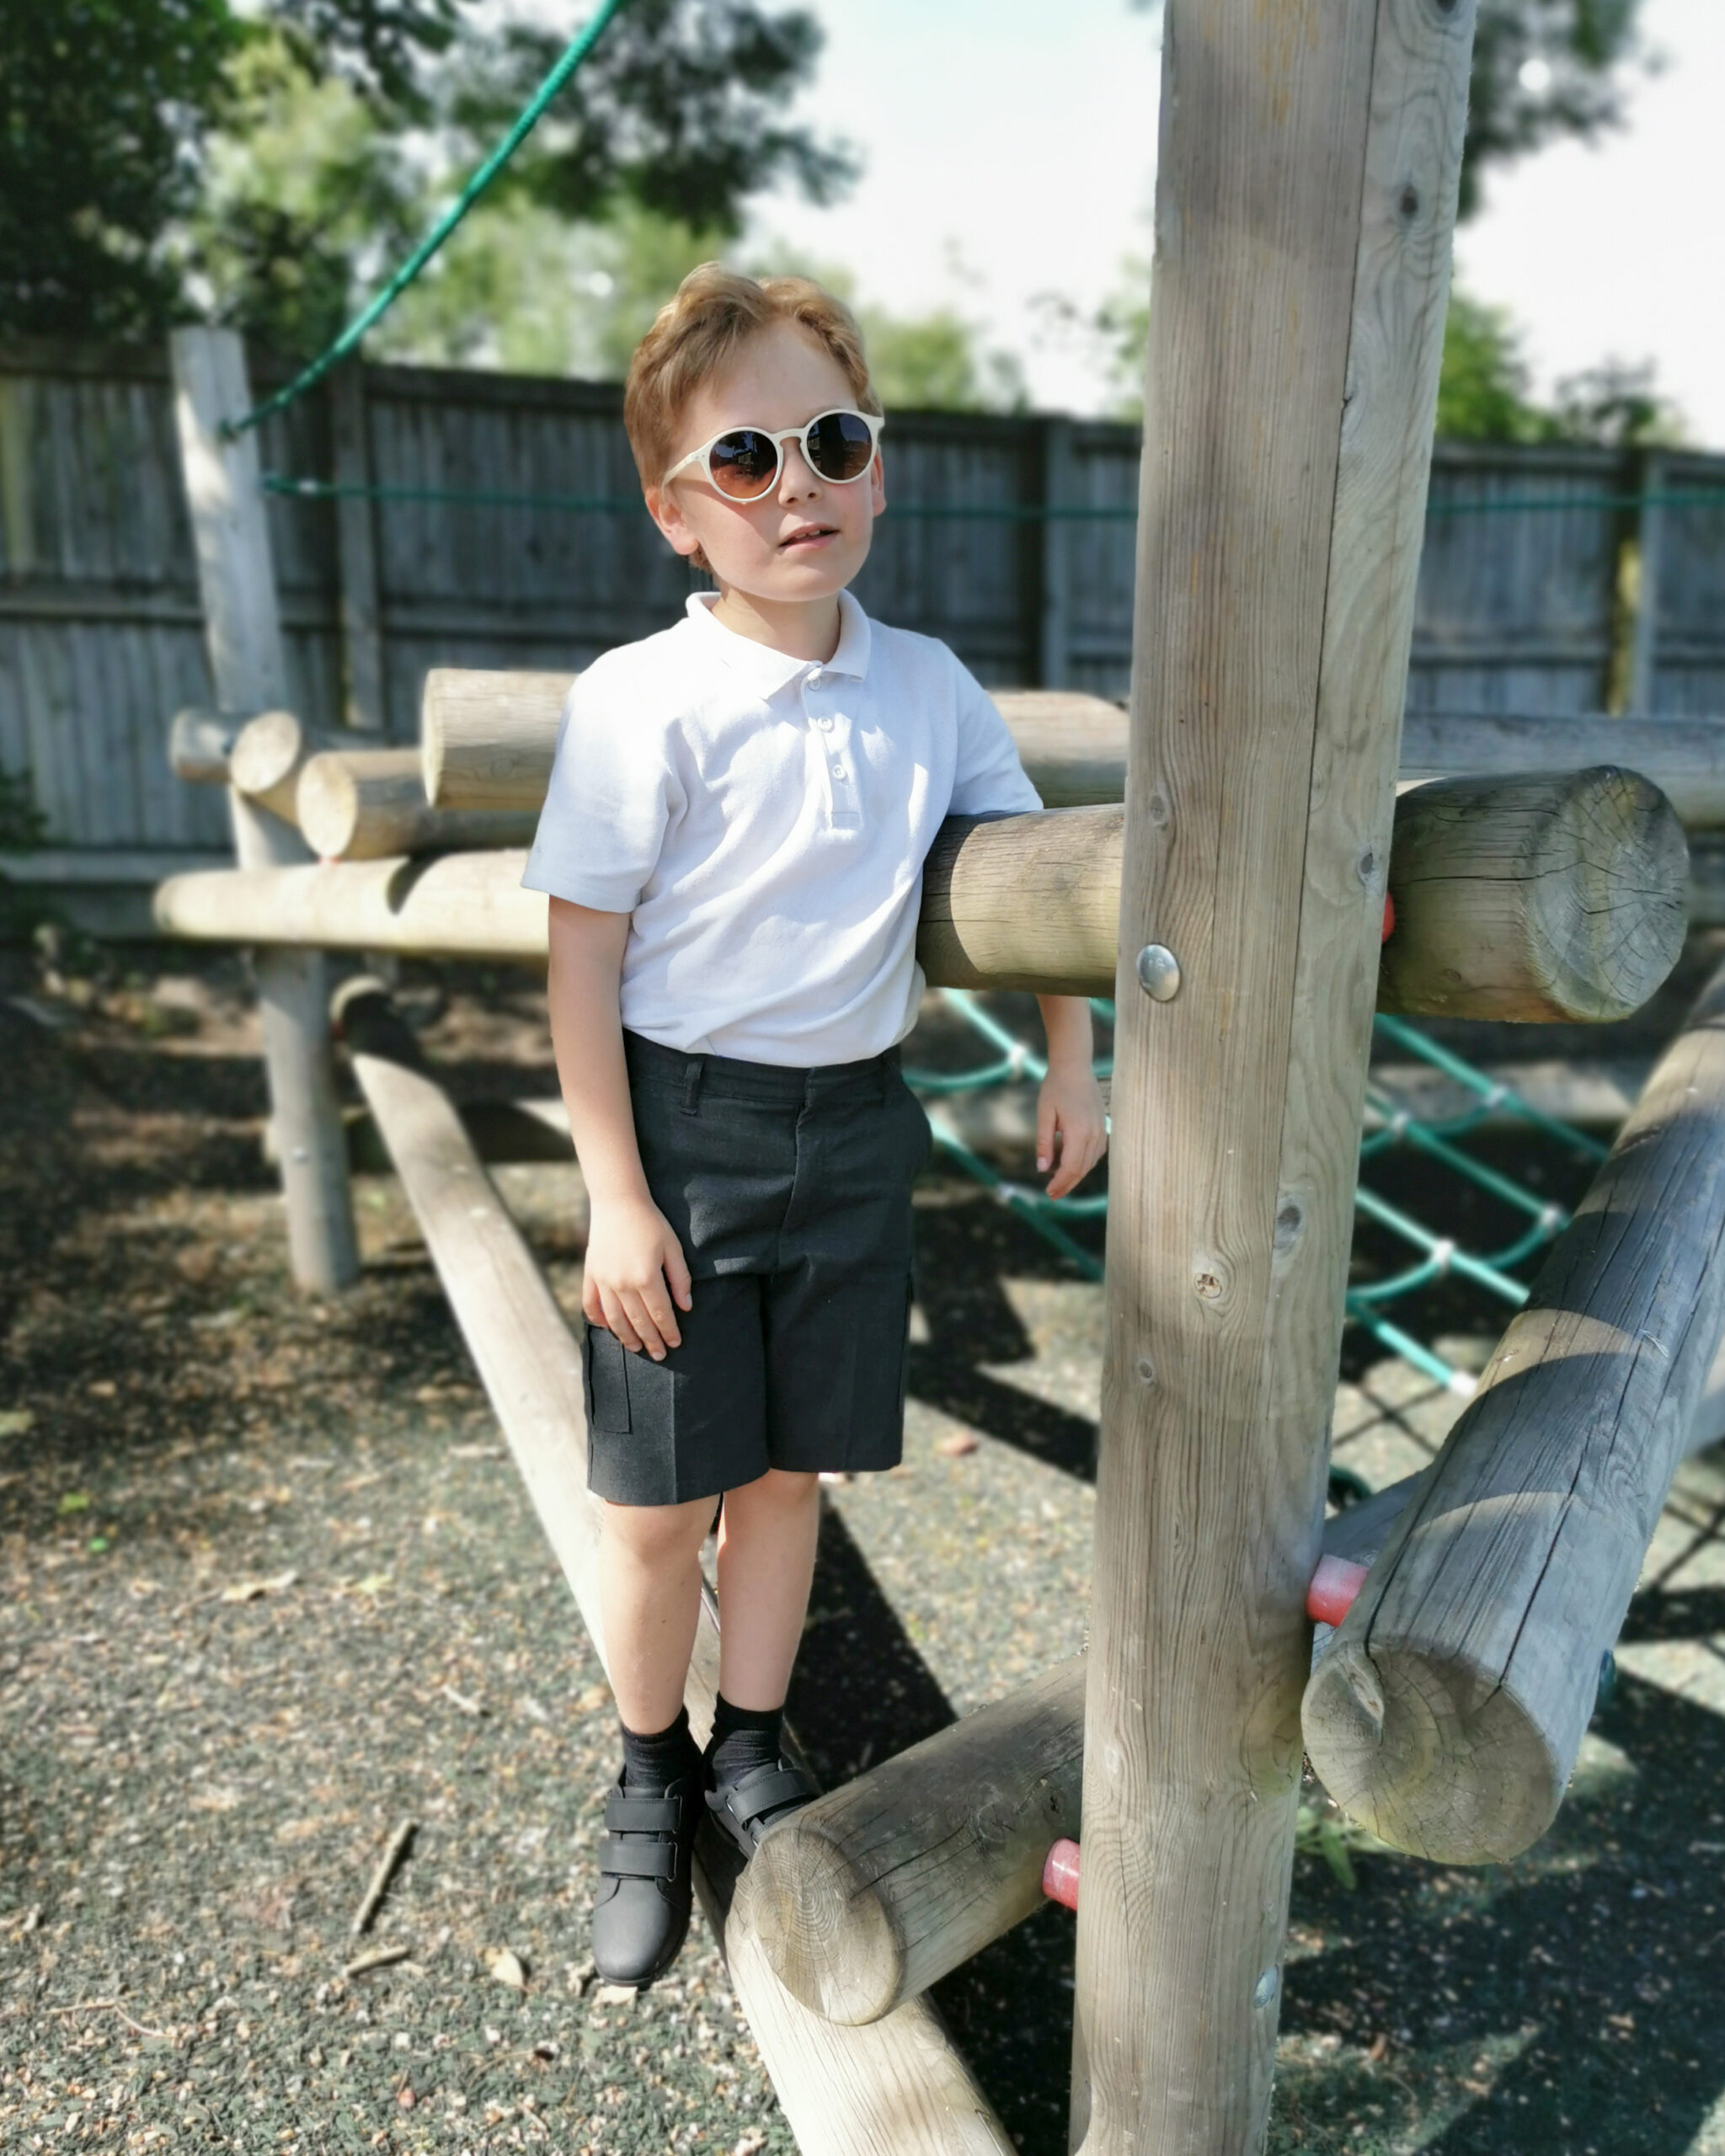 Zig+Star School Shoes, Zig+Star Shoes, School Shoes, School Ready, School Uniform, Good-To-Grow Midsoles, Sustainable Shoes, Unisex Kids' Shoes, Back To School Giveaway, Win, Competition, the Frenchie Mummy, Planet-Conscious Shoes, Sustainably Designed Kids Shoes